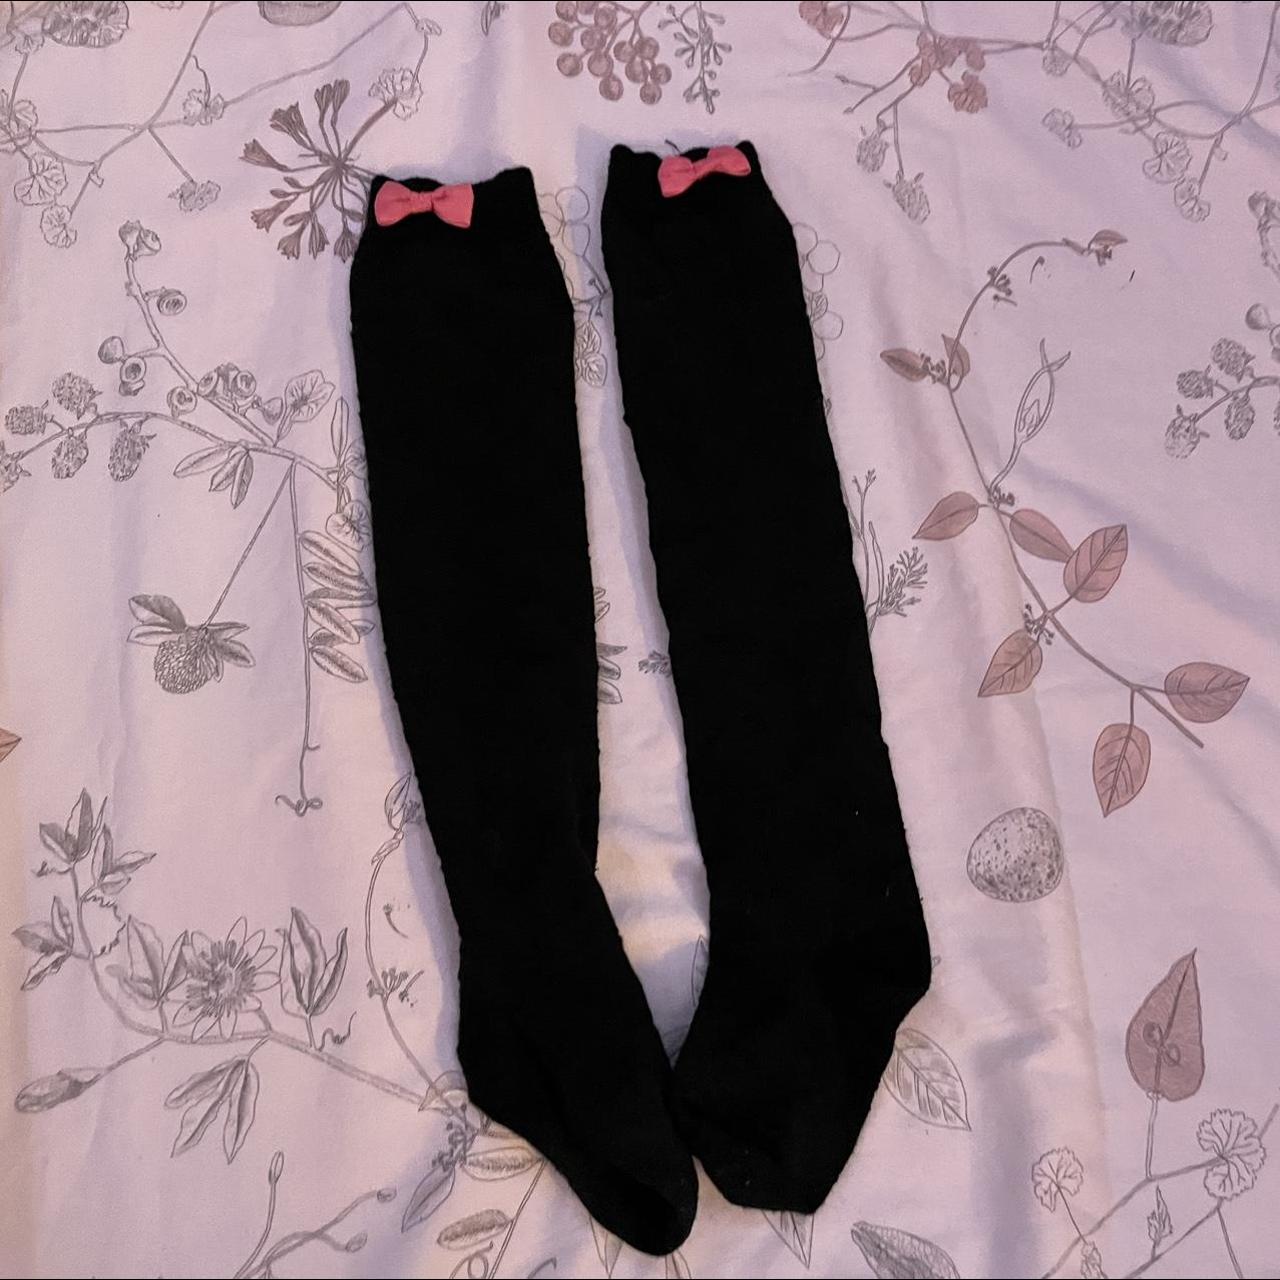 Hot Topic Women's Pink and Black Socks (3)